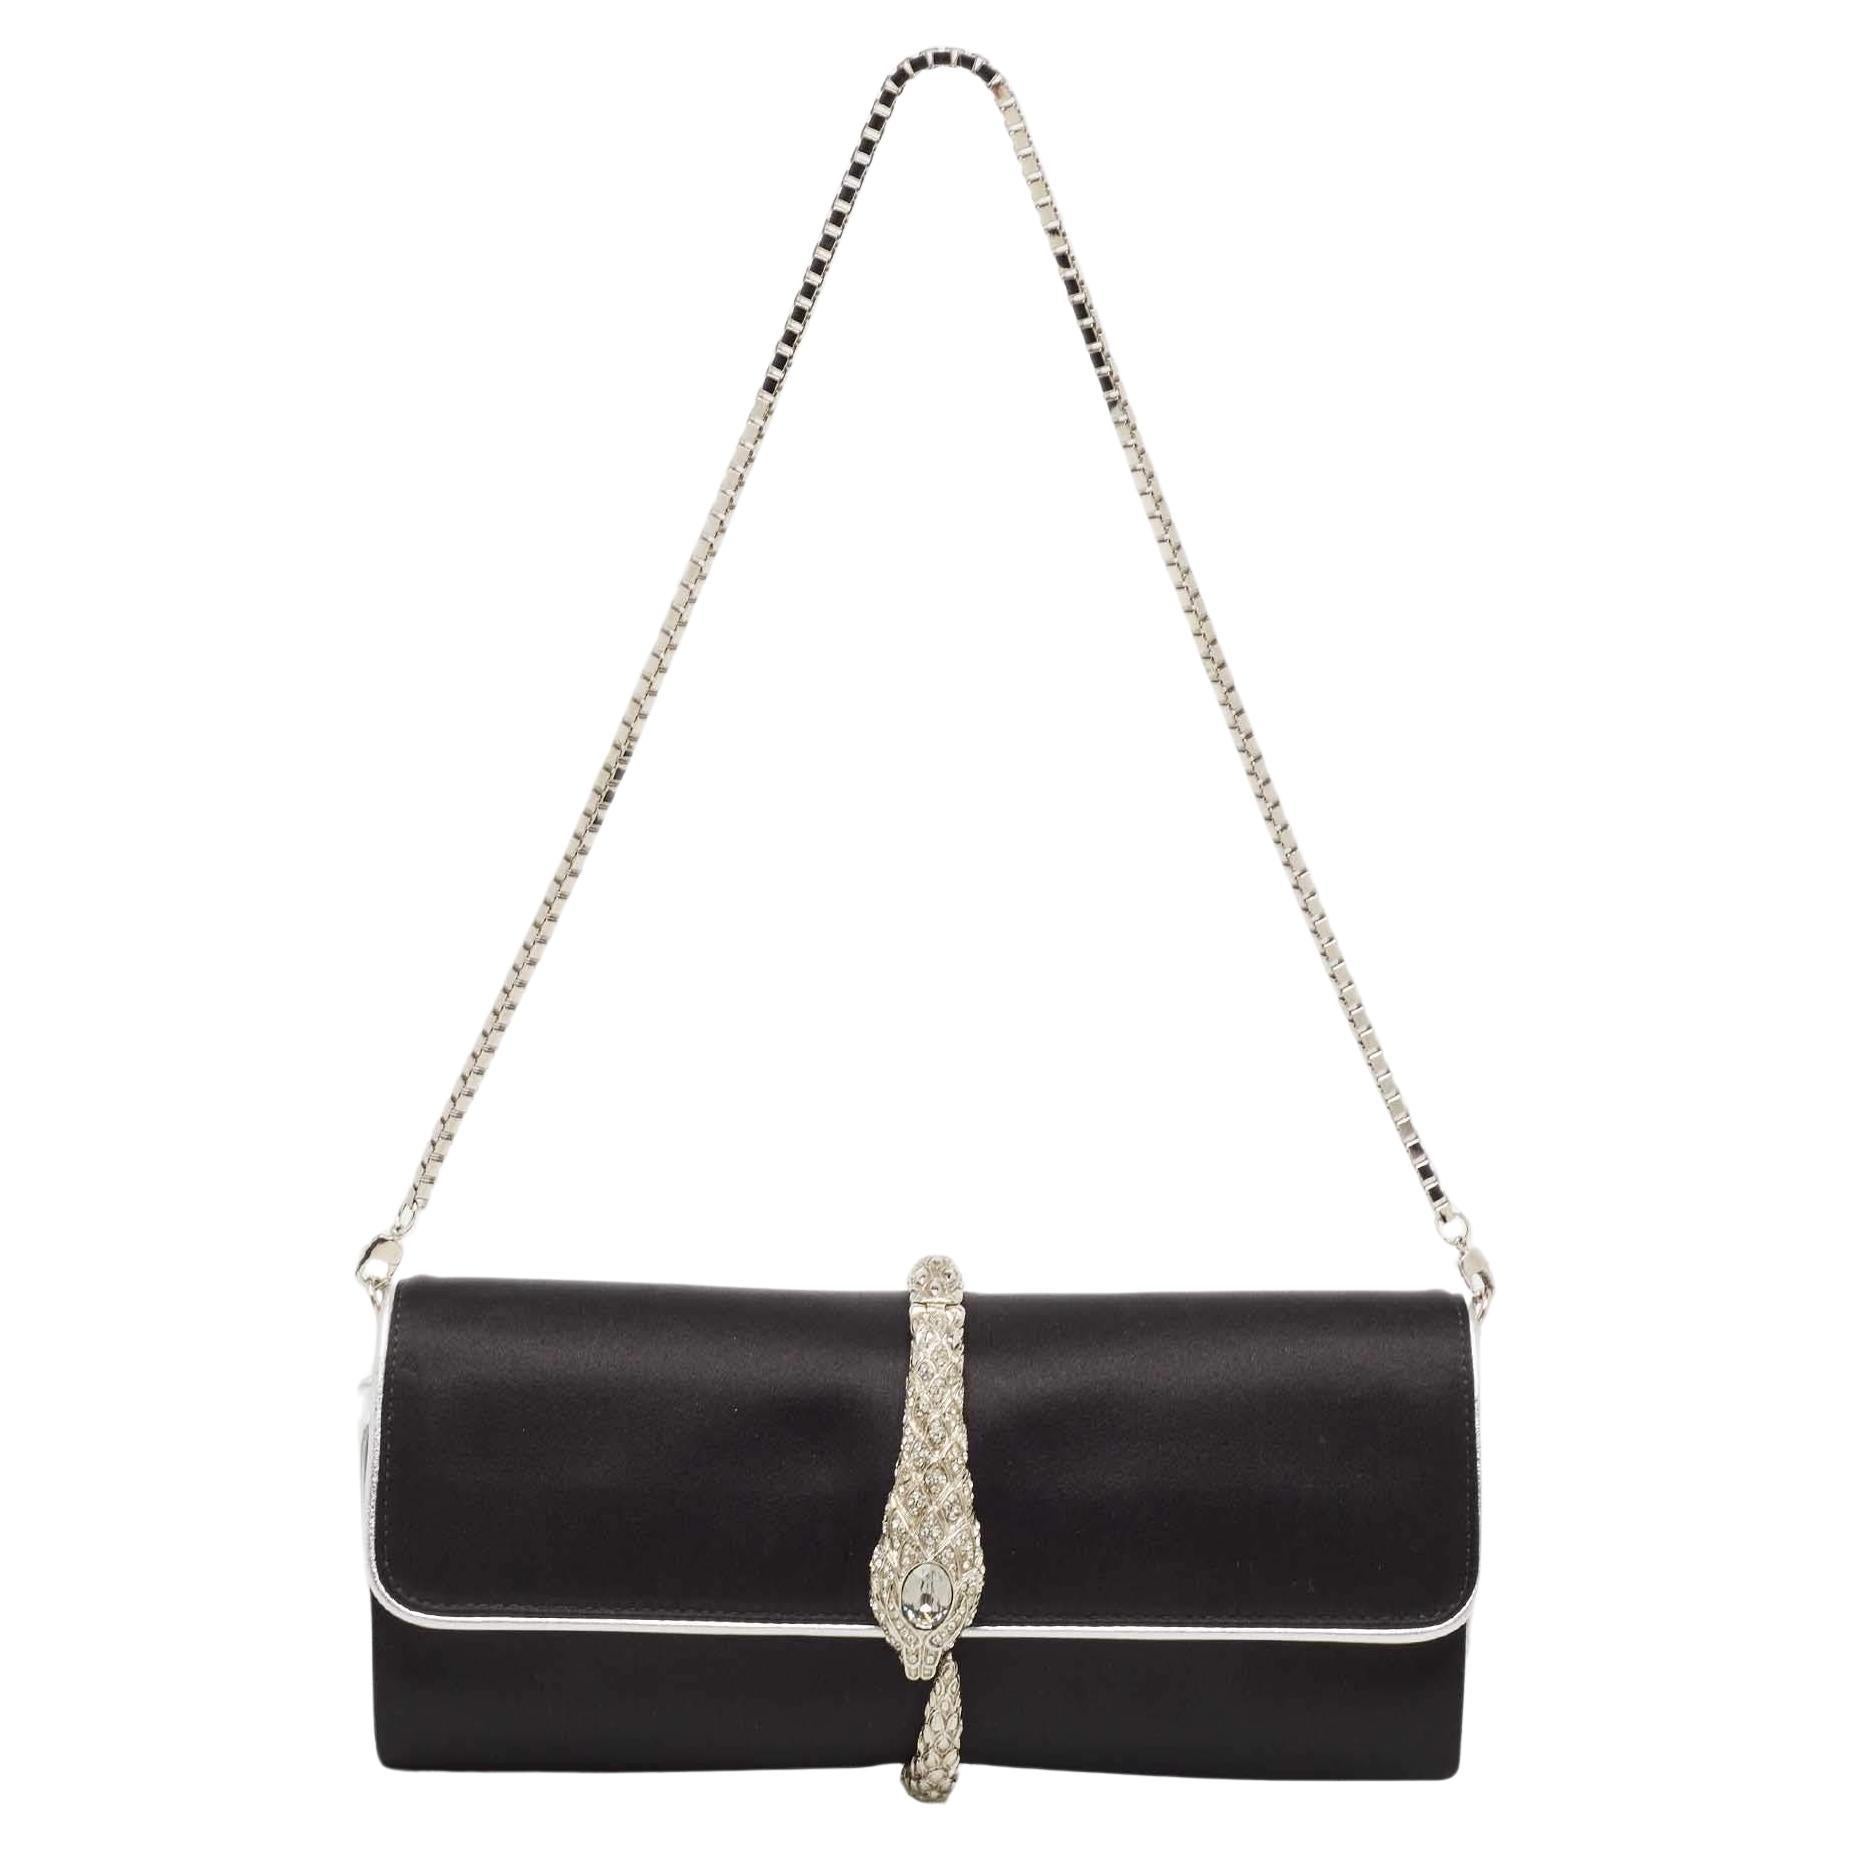 Roberto Cavalli Black/Silver Satin and Leather Snake Embellished Chain Clutch For Sale